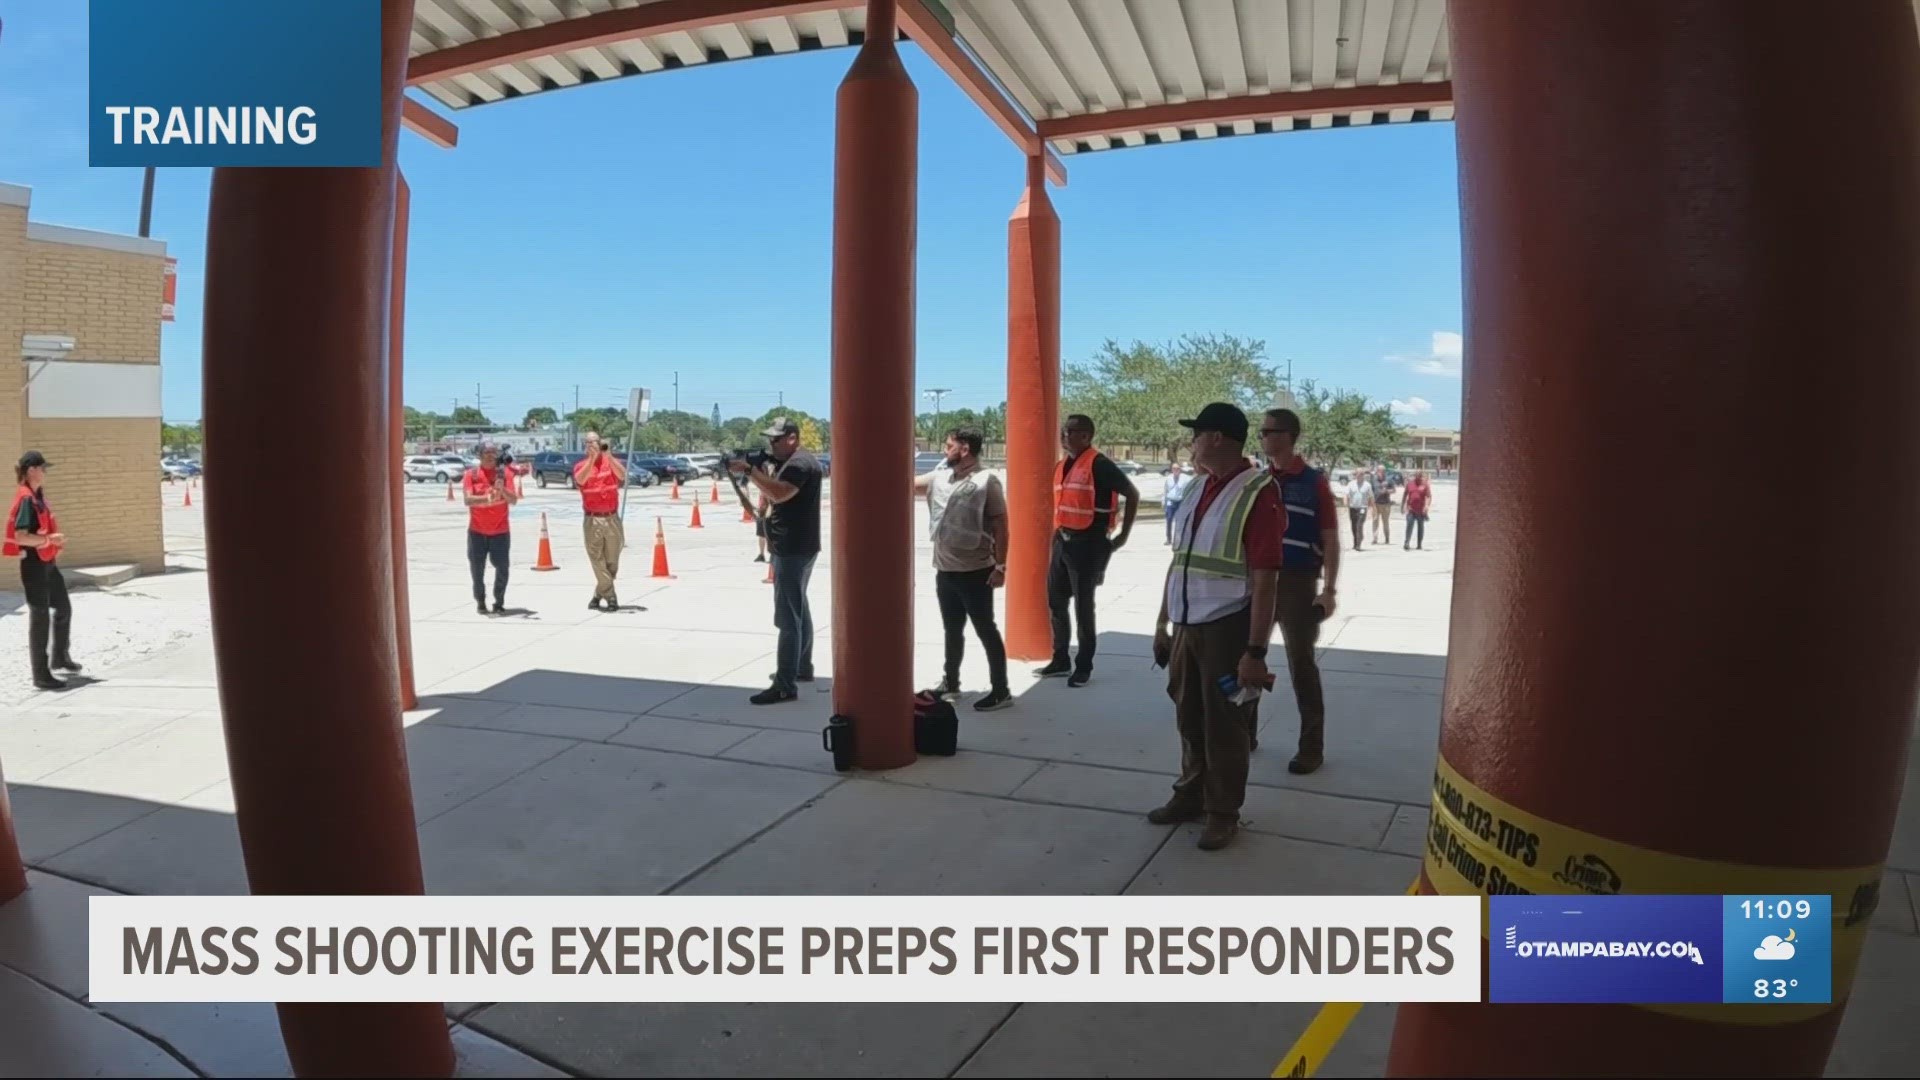 More than 300 people took part in the exercise that tested the response to a mass casualty event with an active shooter at a local school.